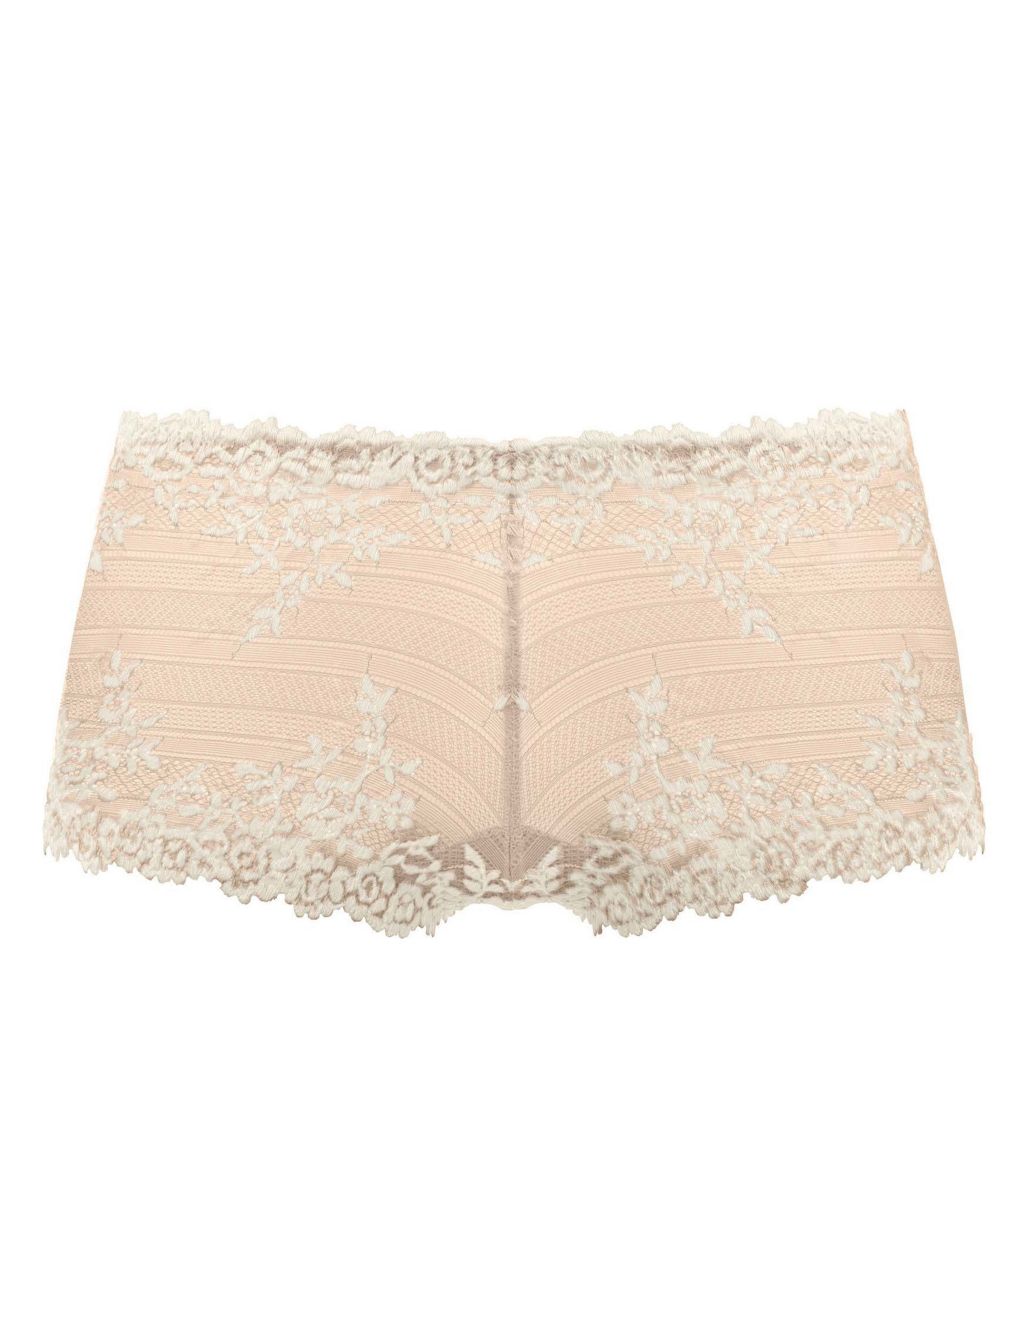 Embrace Lace Low Rise Knicker Shorts 1 of 5